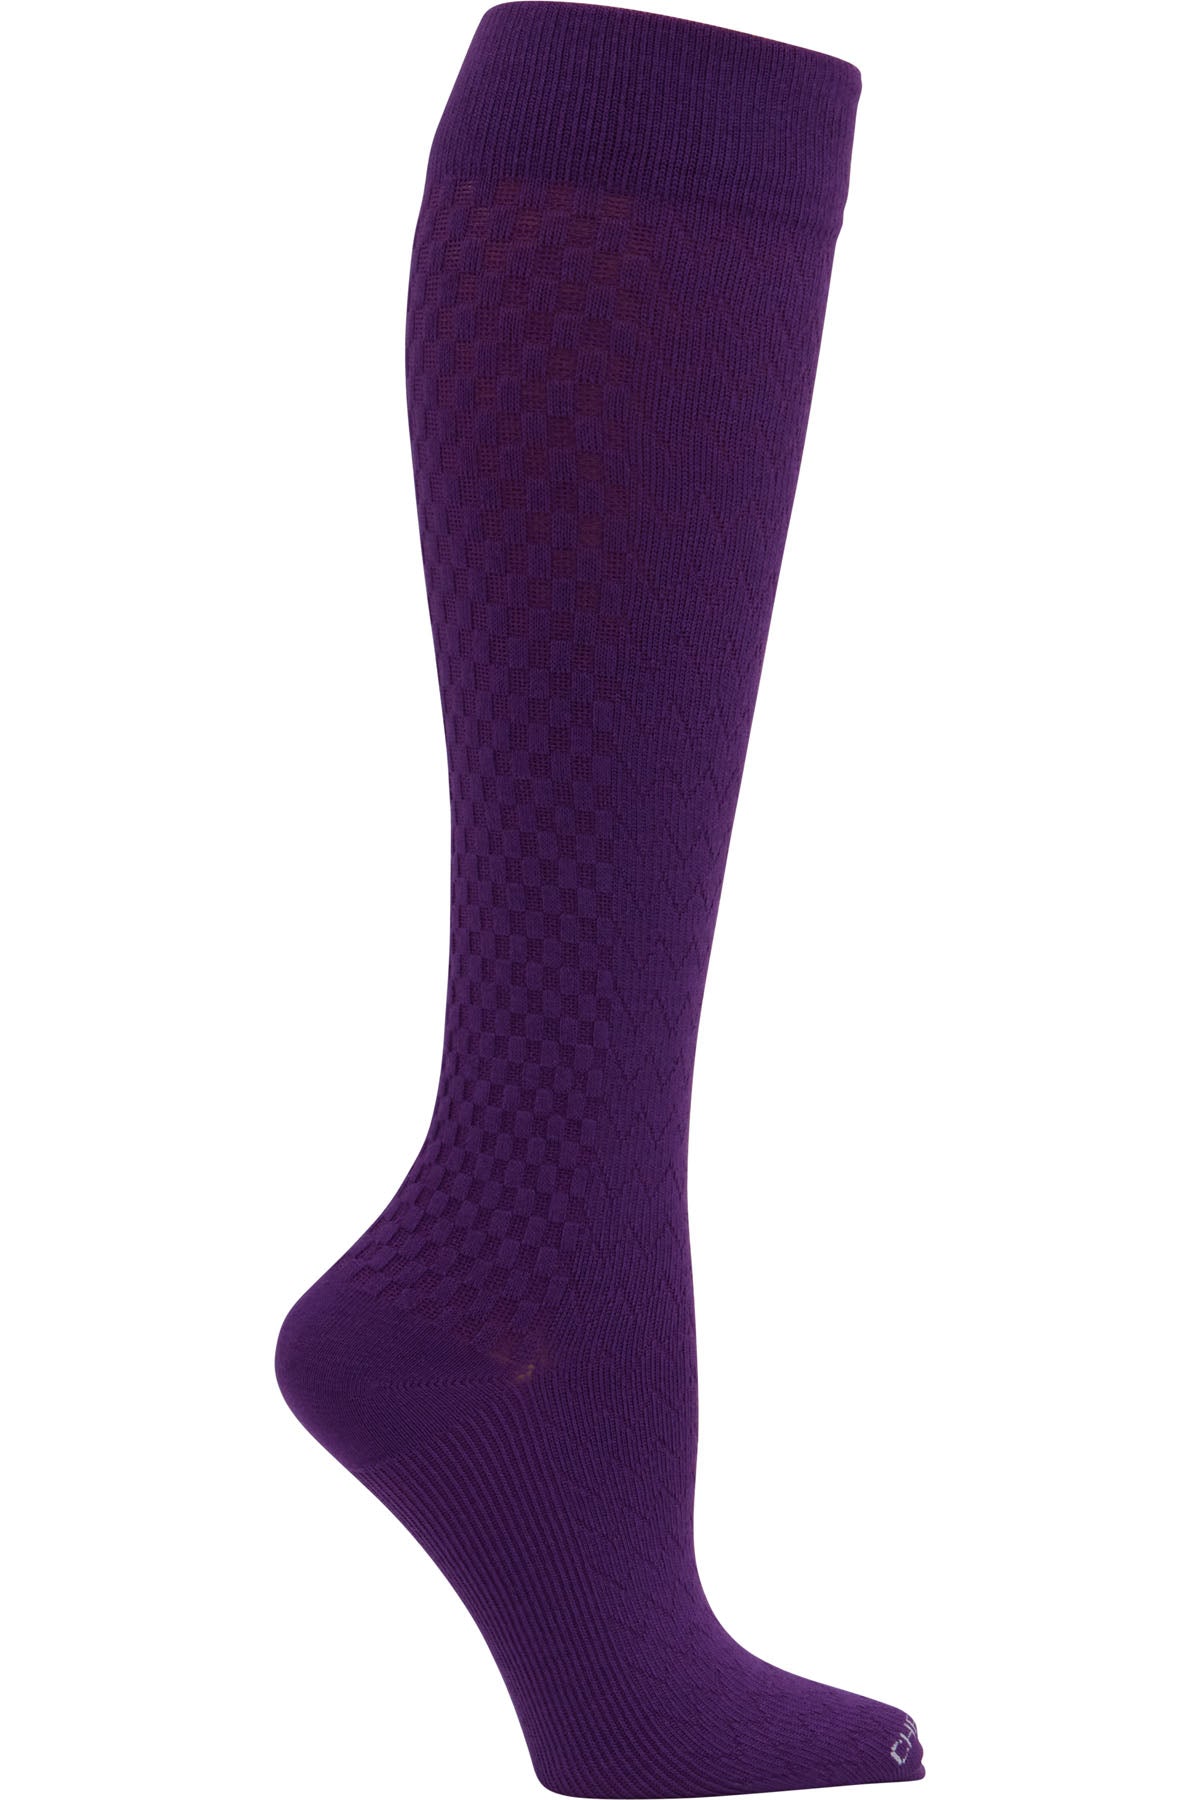 Cherokee Plus Size Mild Compression Wide Calf Socks True Support 10-15 mmHg in Wisteria at Parker's Clothing and Shoes.